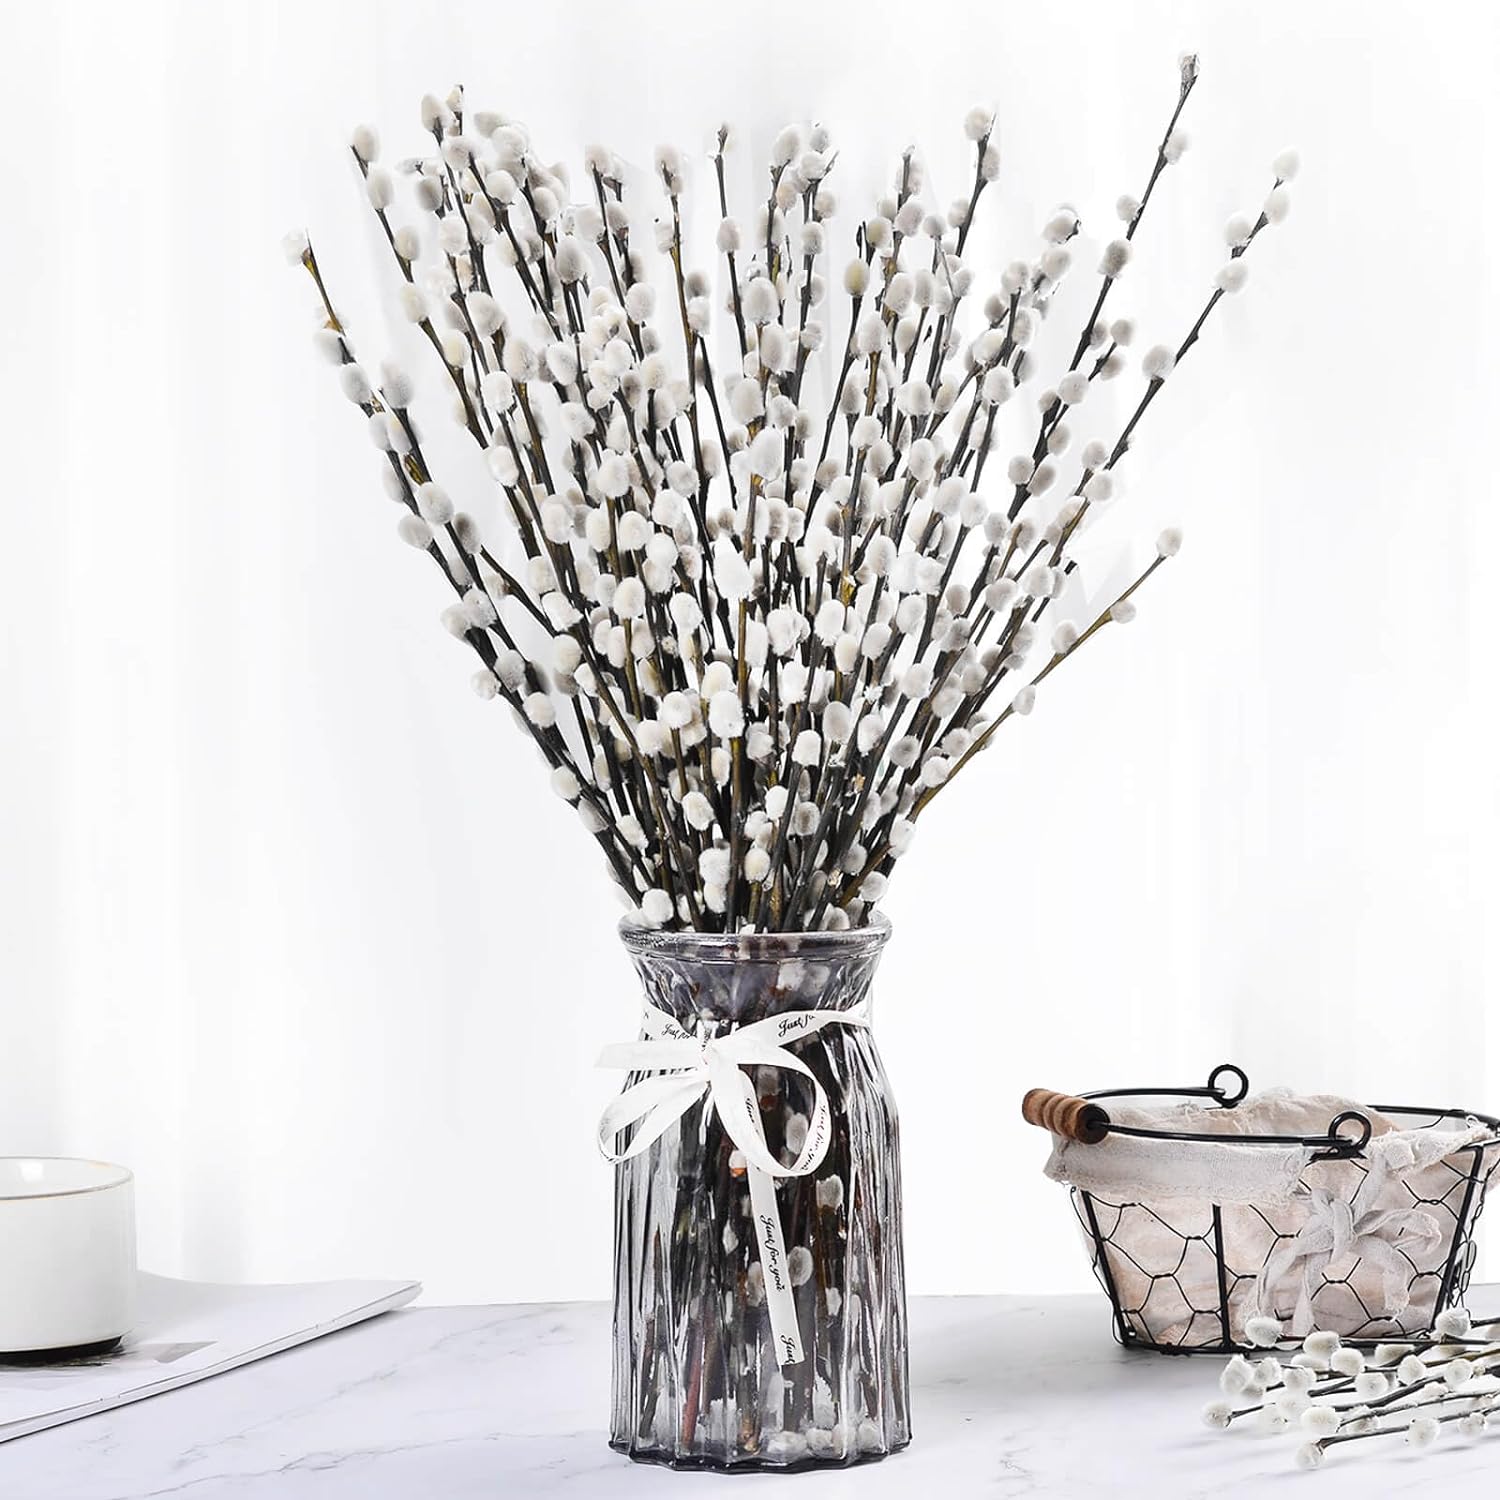 Bulk 45 Pcs Premium 17-inch Real Dried Willow Branches Natural with White Flowers Perfect for Indoor/Outdoor Events Weddings Parties Hotels Fireplaces and Yards Wholesale